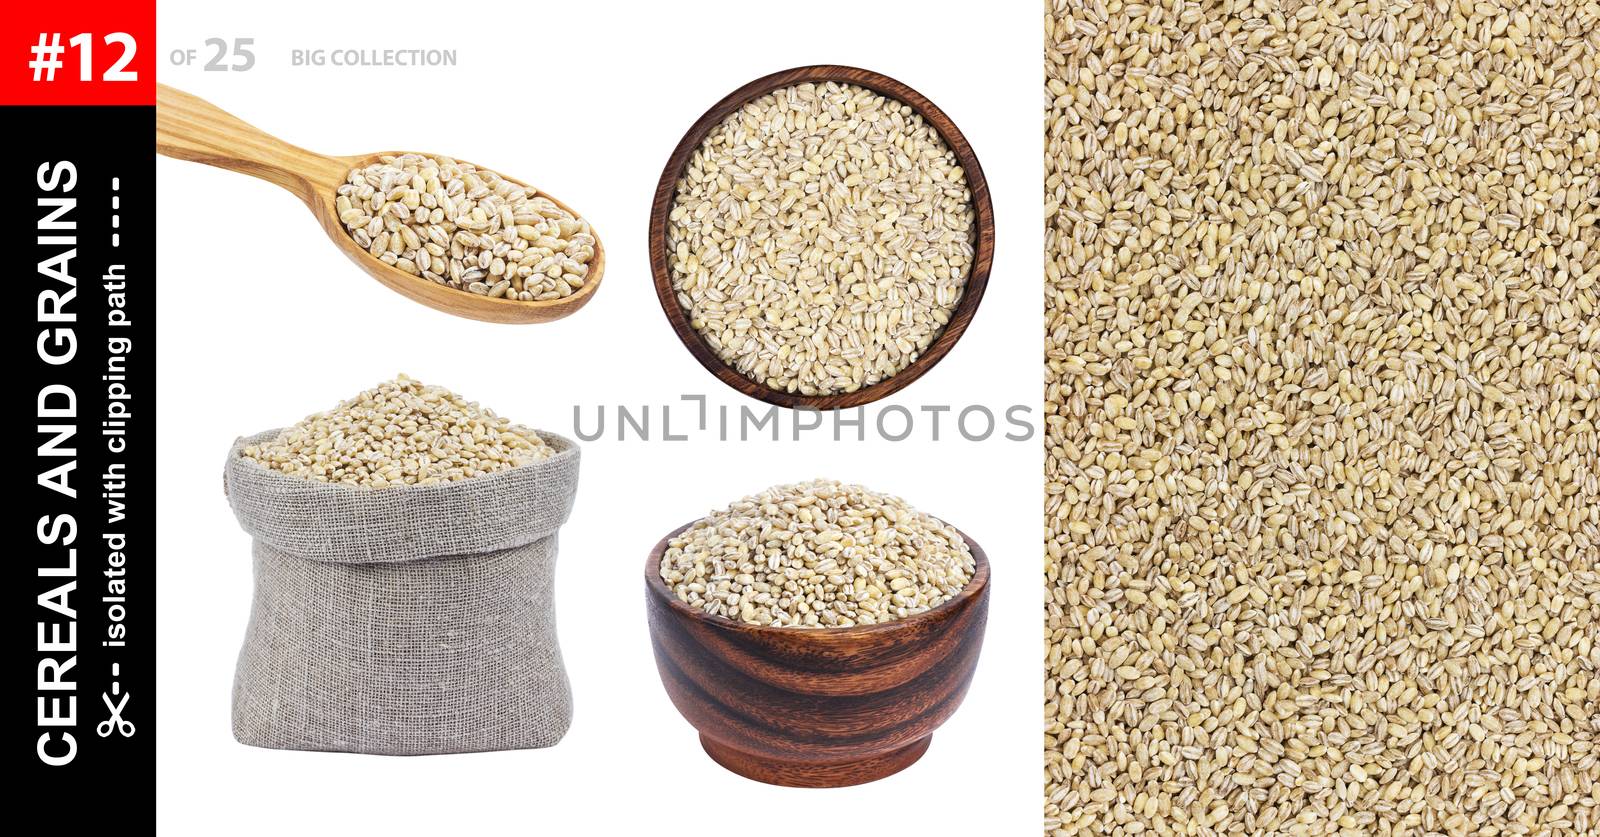 Pearl barley in different dishware isolated on white background, collection by xamtiw